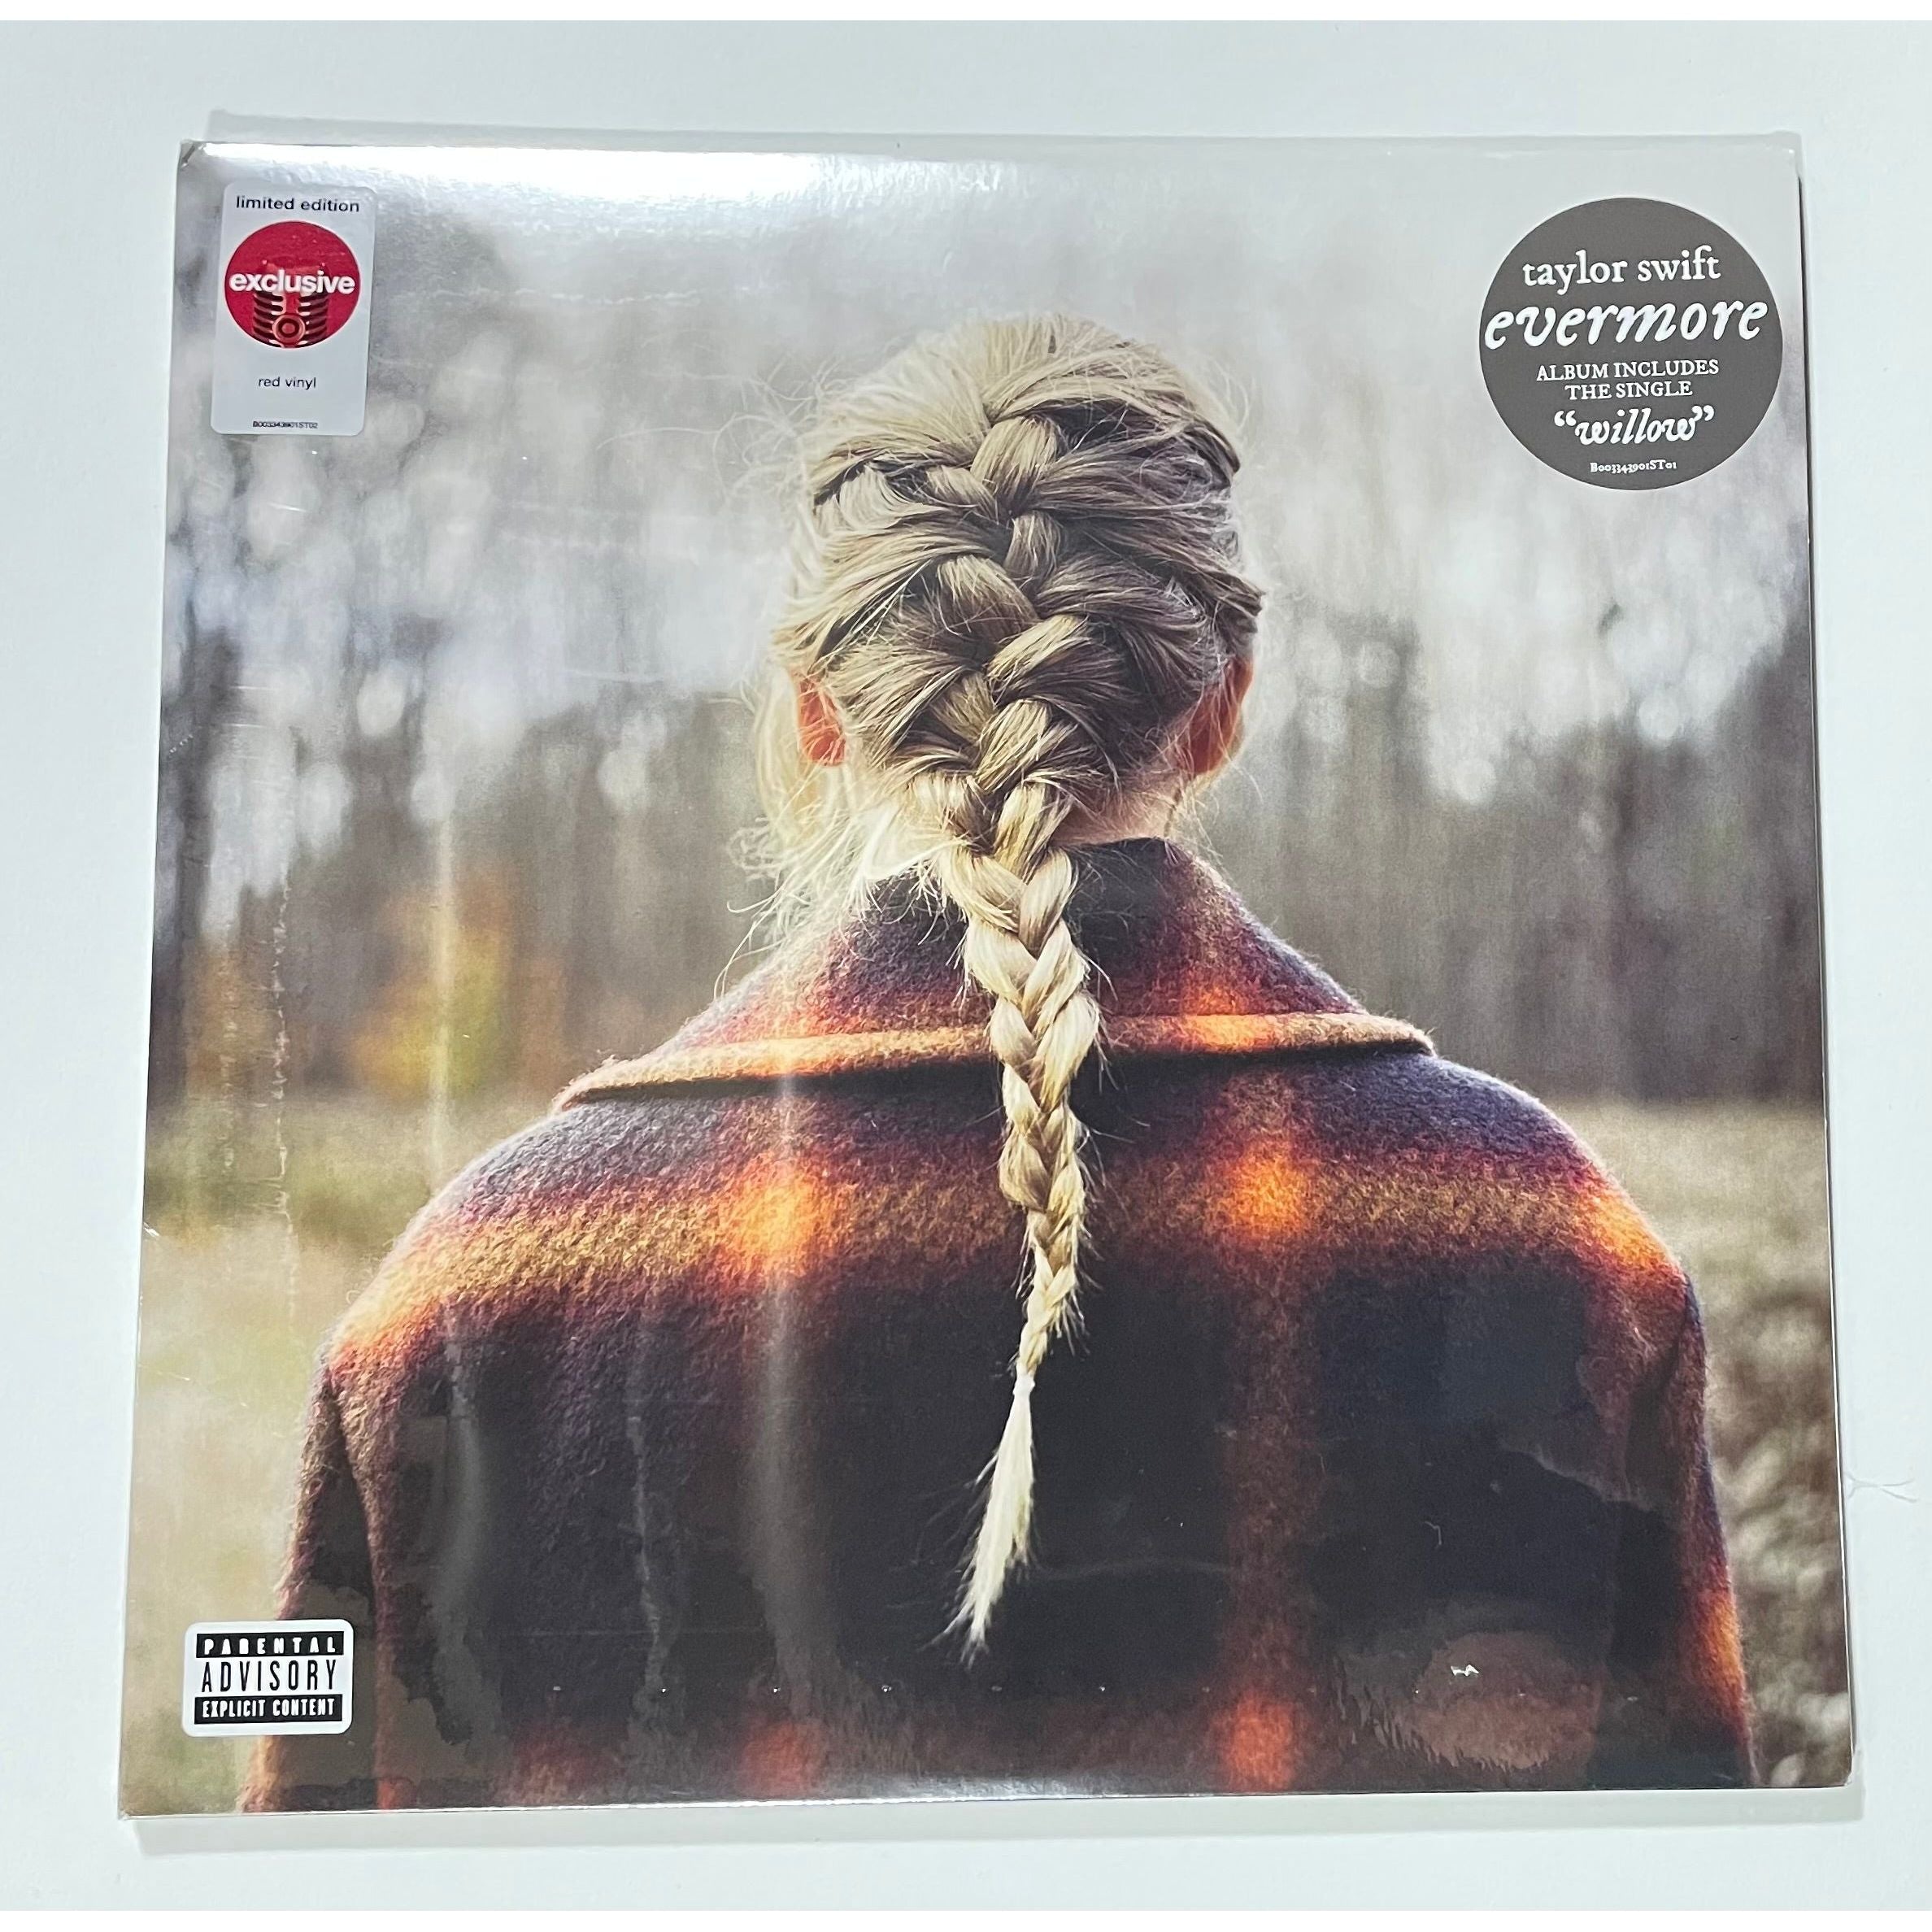 Evermore by Taylor Swift (Vinyl, 28 May 2021, 2 Disk, Virgin)